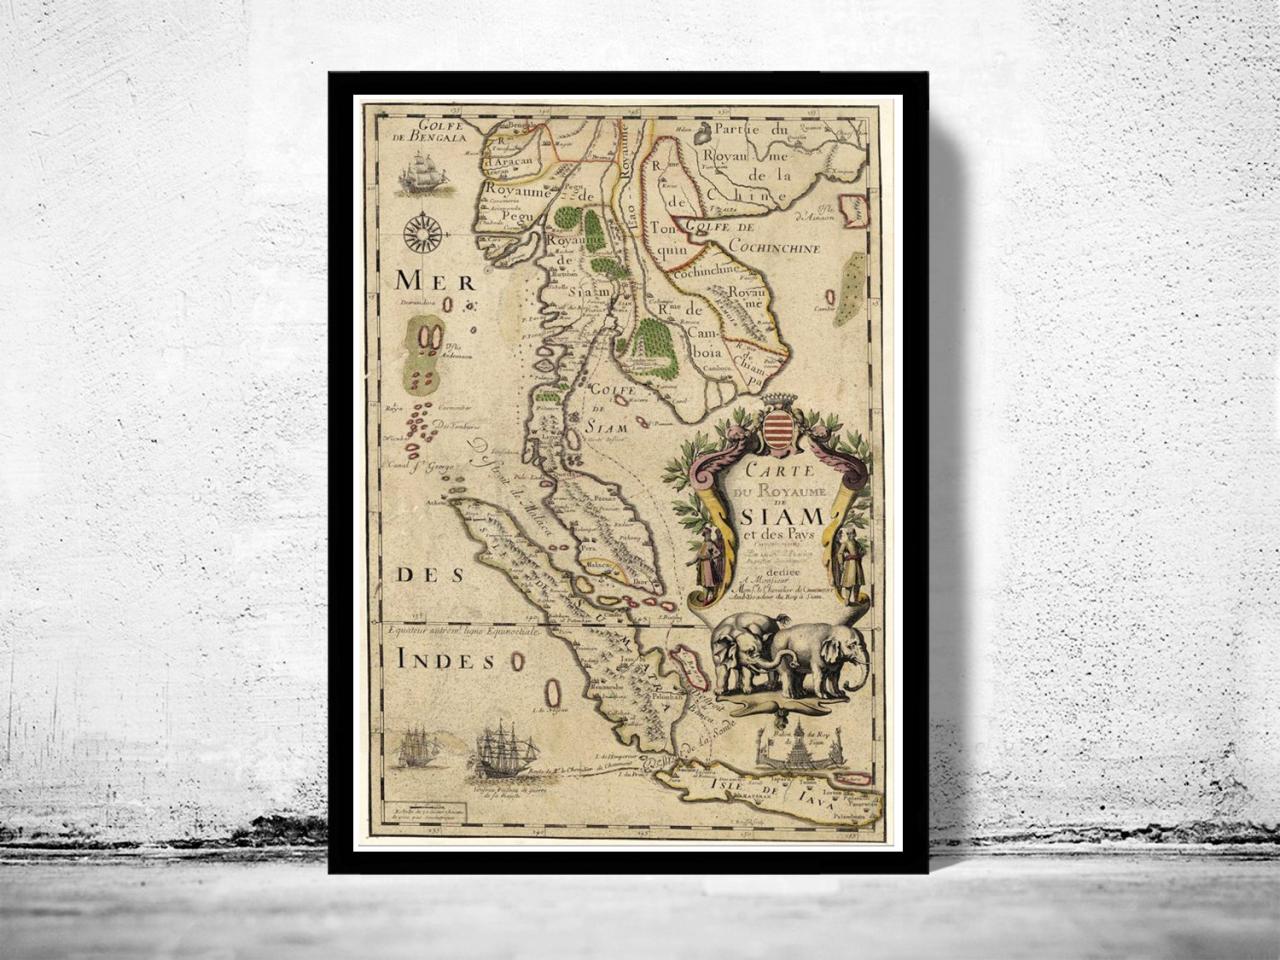 Old Map Of Thailand, Old Siam 1686